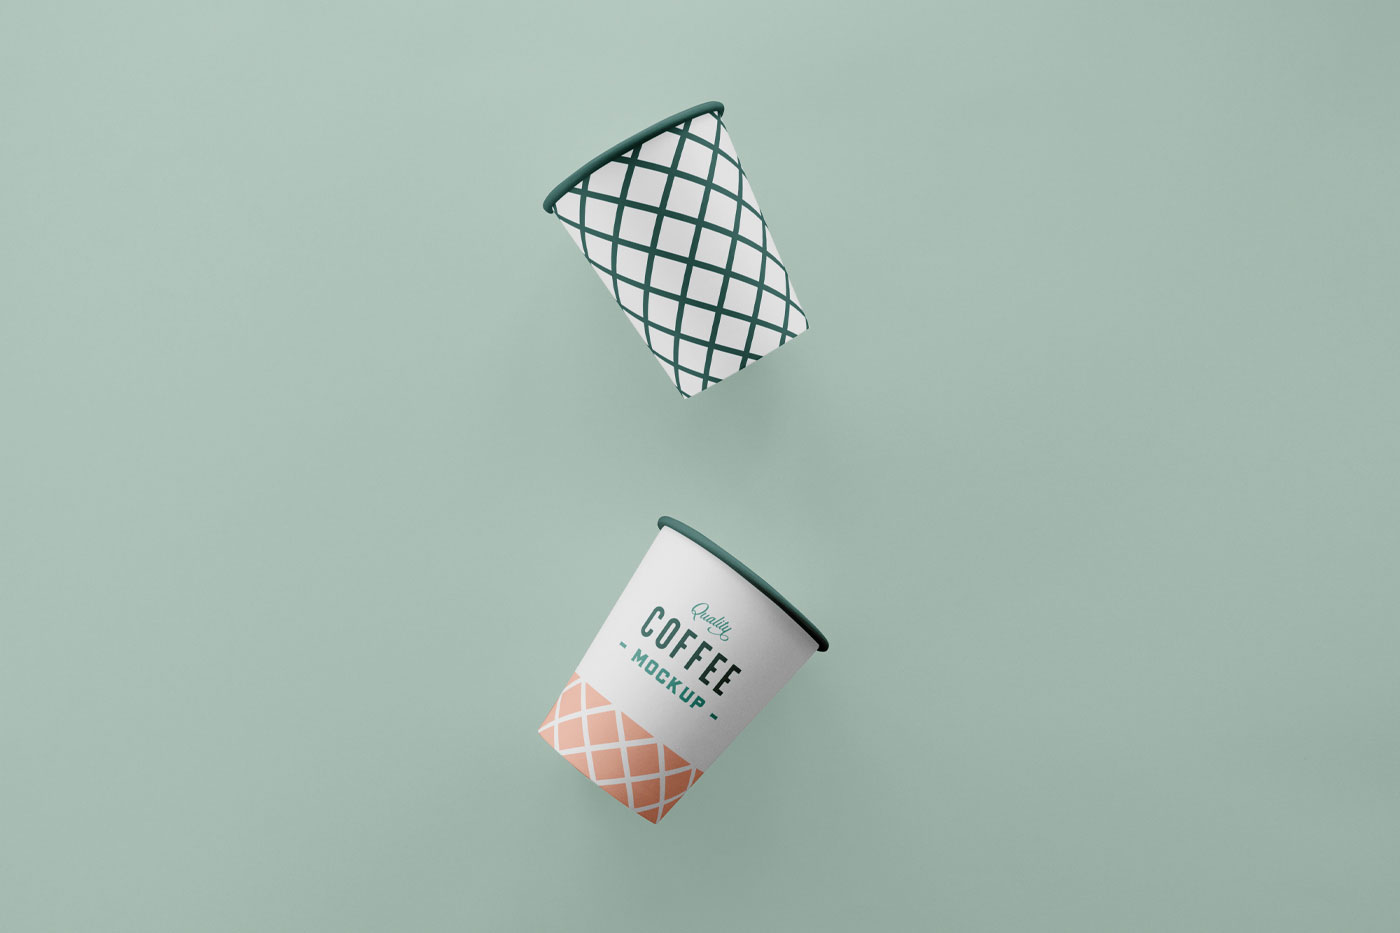 https://resourceboy.com/wp-content/uploads/2021/10/mockup-displaying-two-floating-coffee-paper-cups-1.jpg